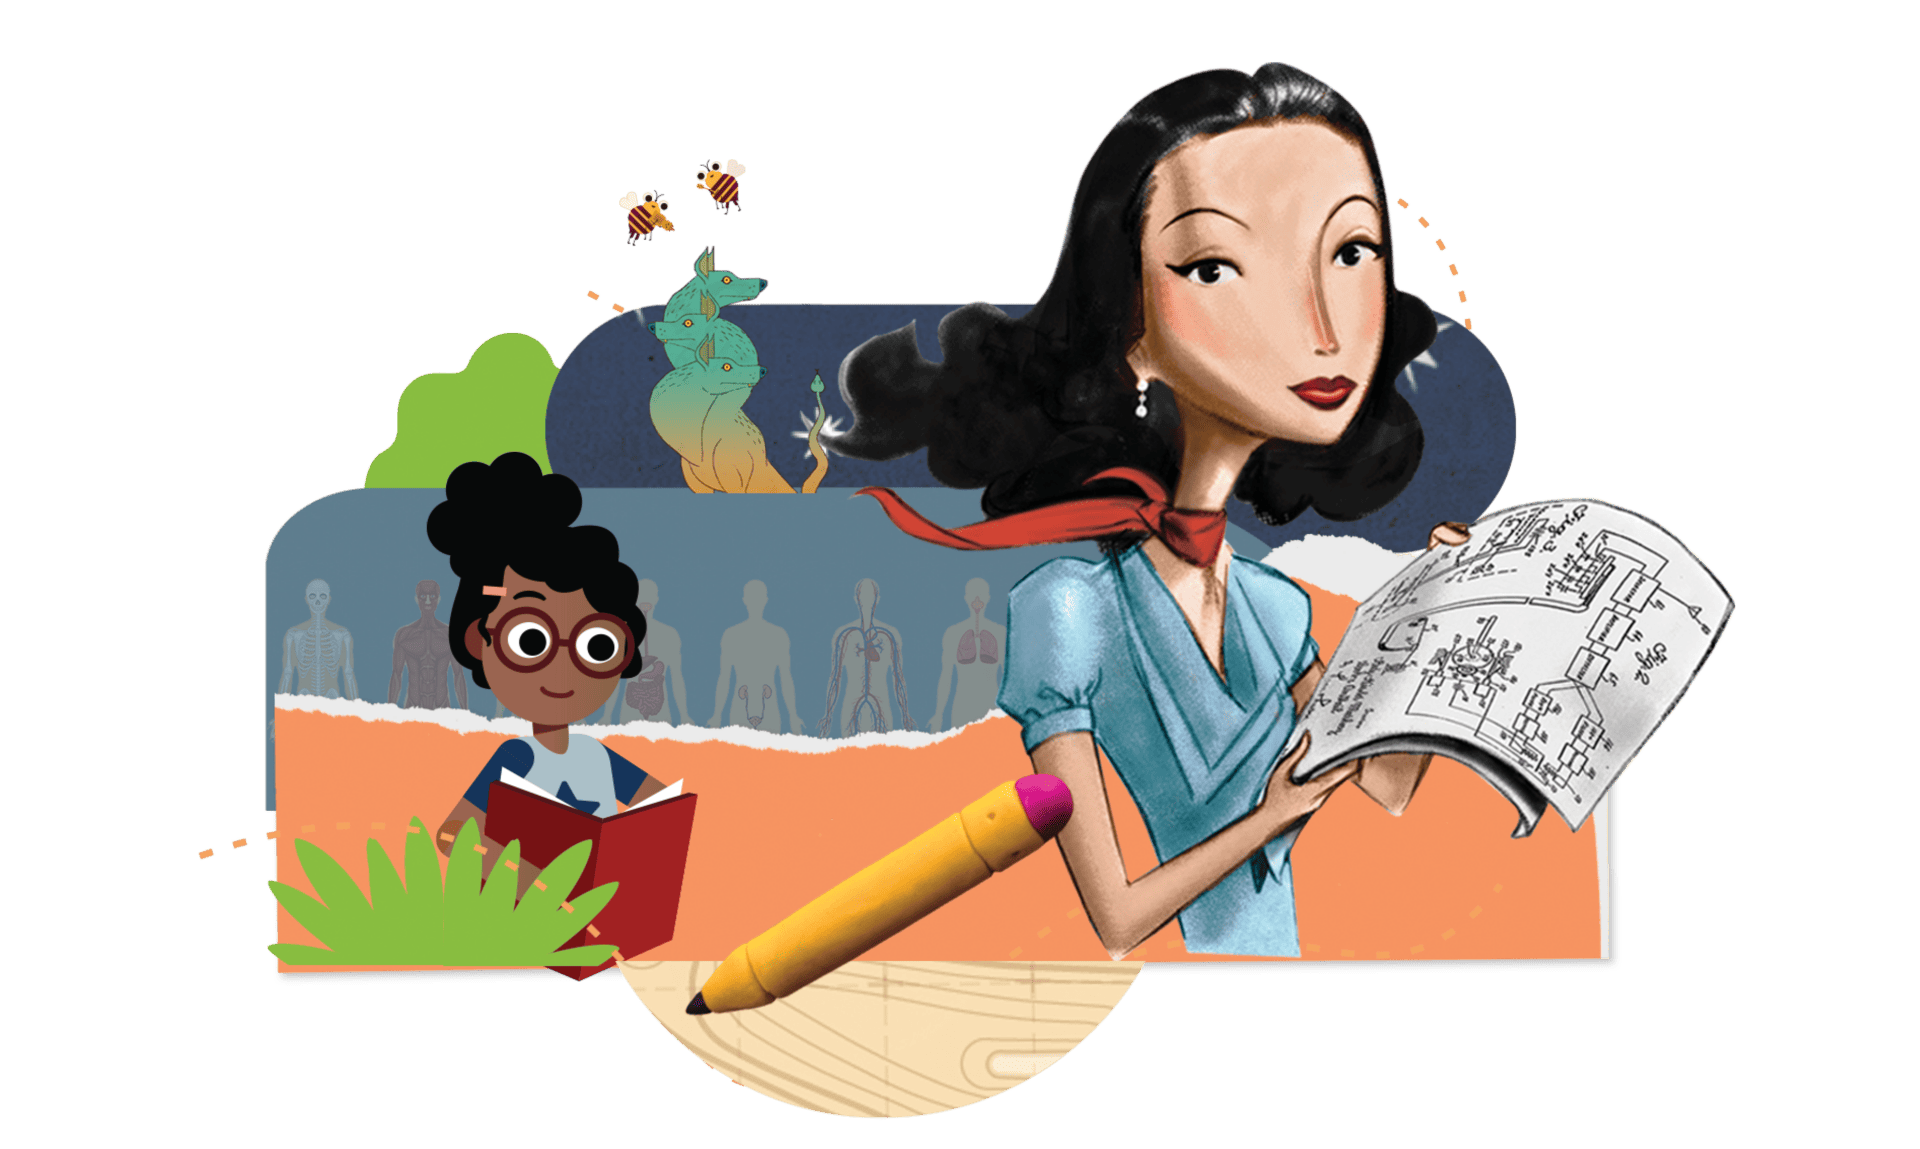 Illustration of a diverse group of people engaged in creative activities, including a woman holding architectural plans and a young girl reading a book.